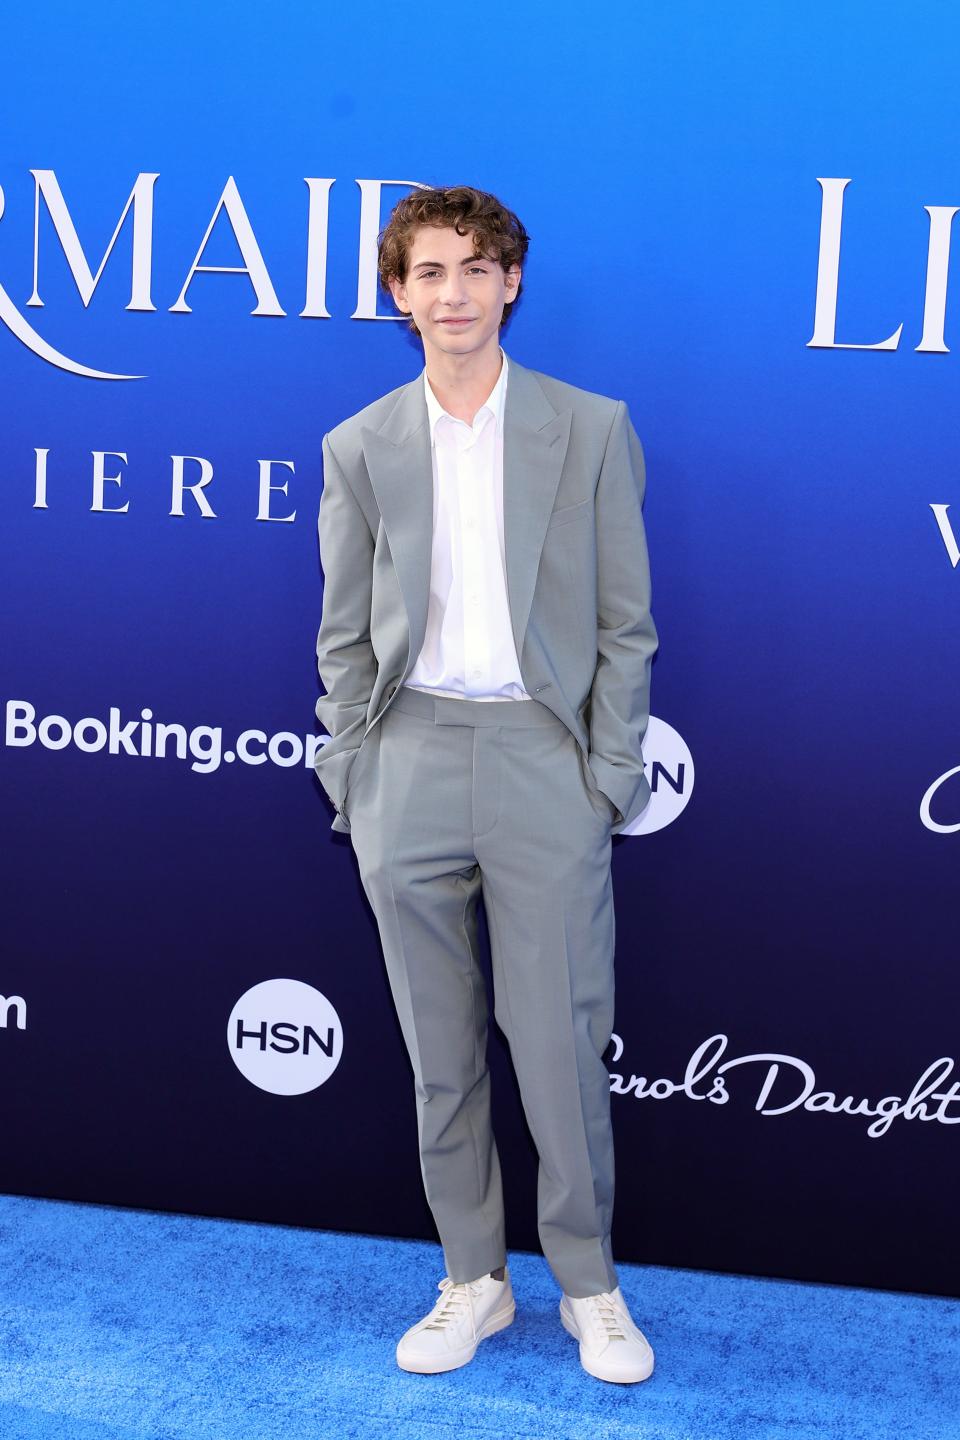 Jacob Tremblay attends the world premiere of Disney's "The Little Mermaid" on May 08, 2023 in Hollywood, California.